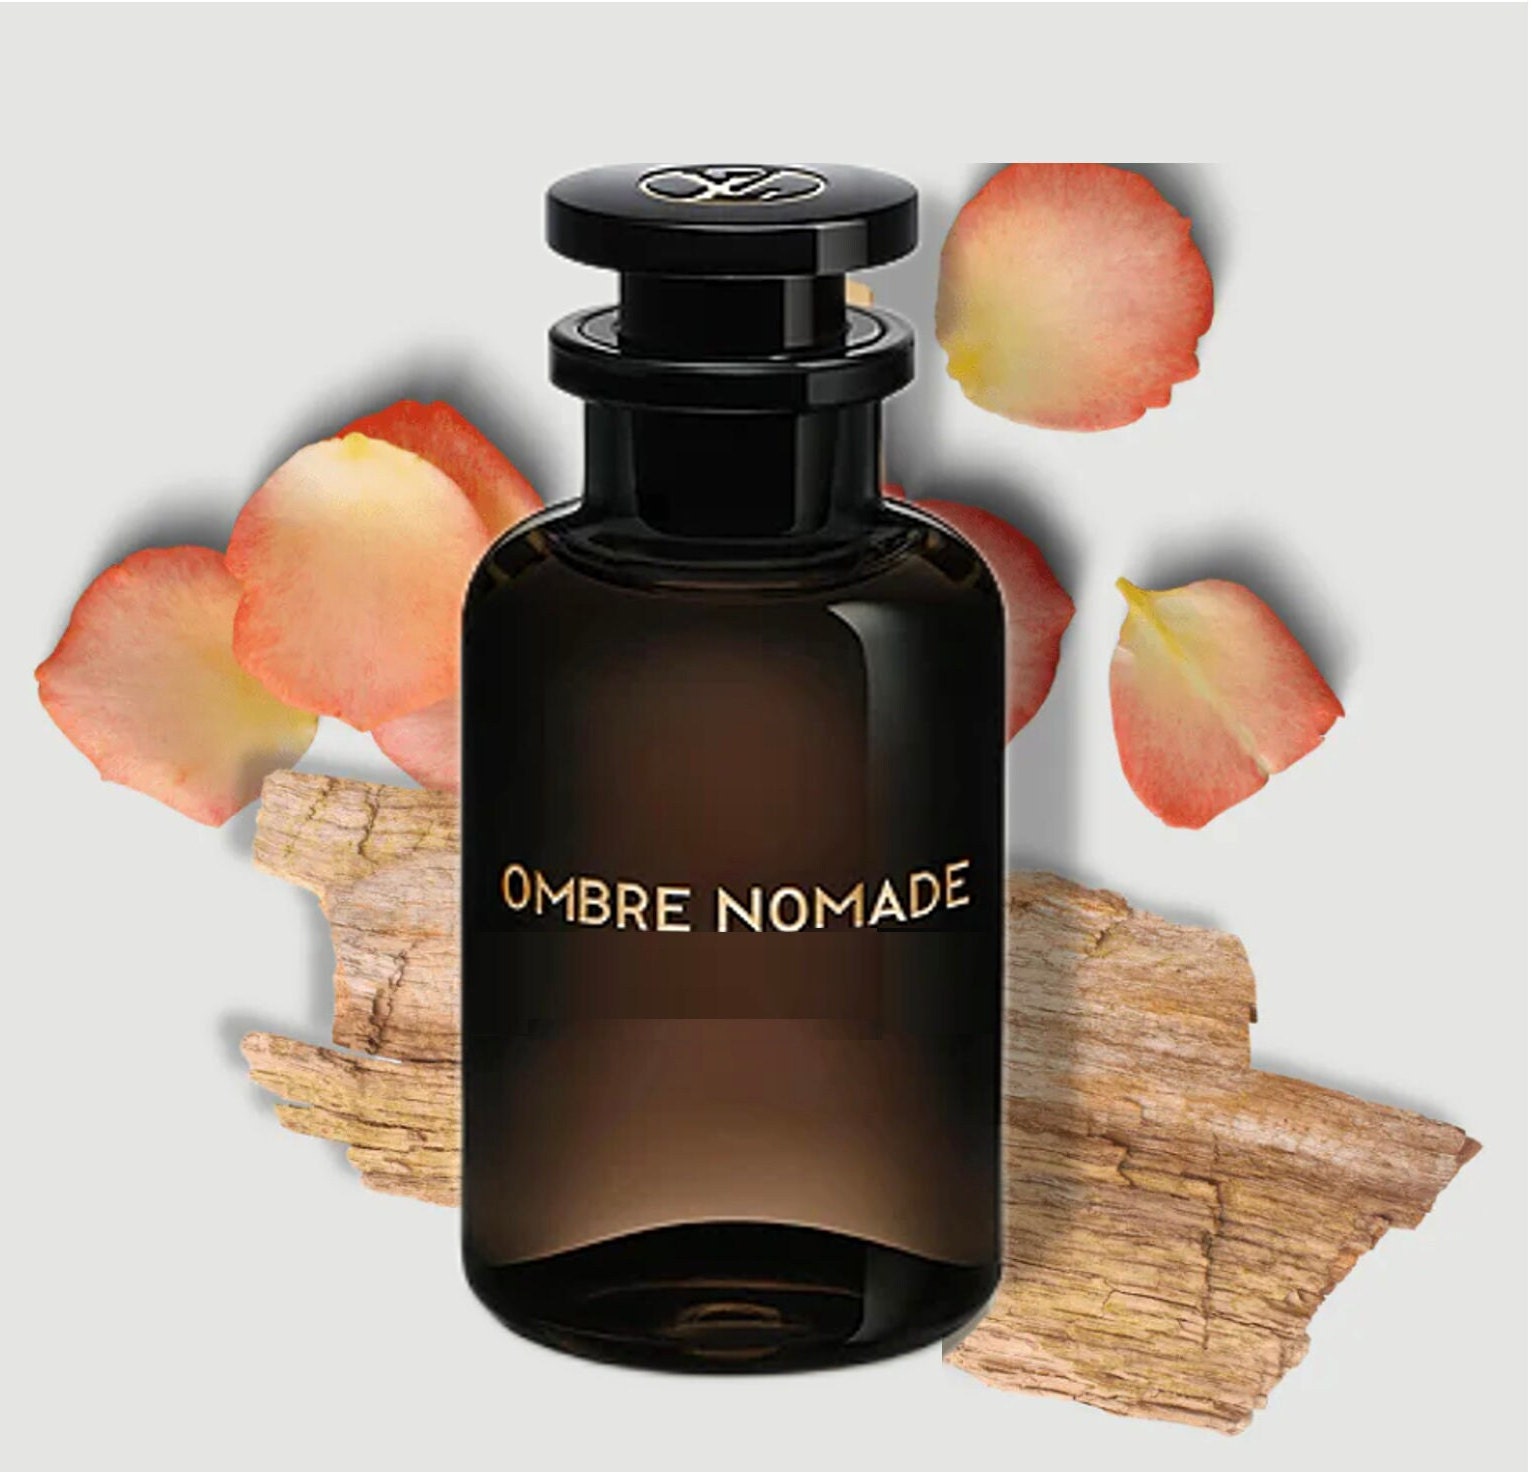 Ombre Nomade Perfume Extract Glass Sample - Etsy